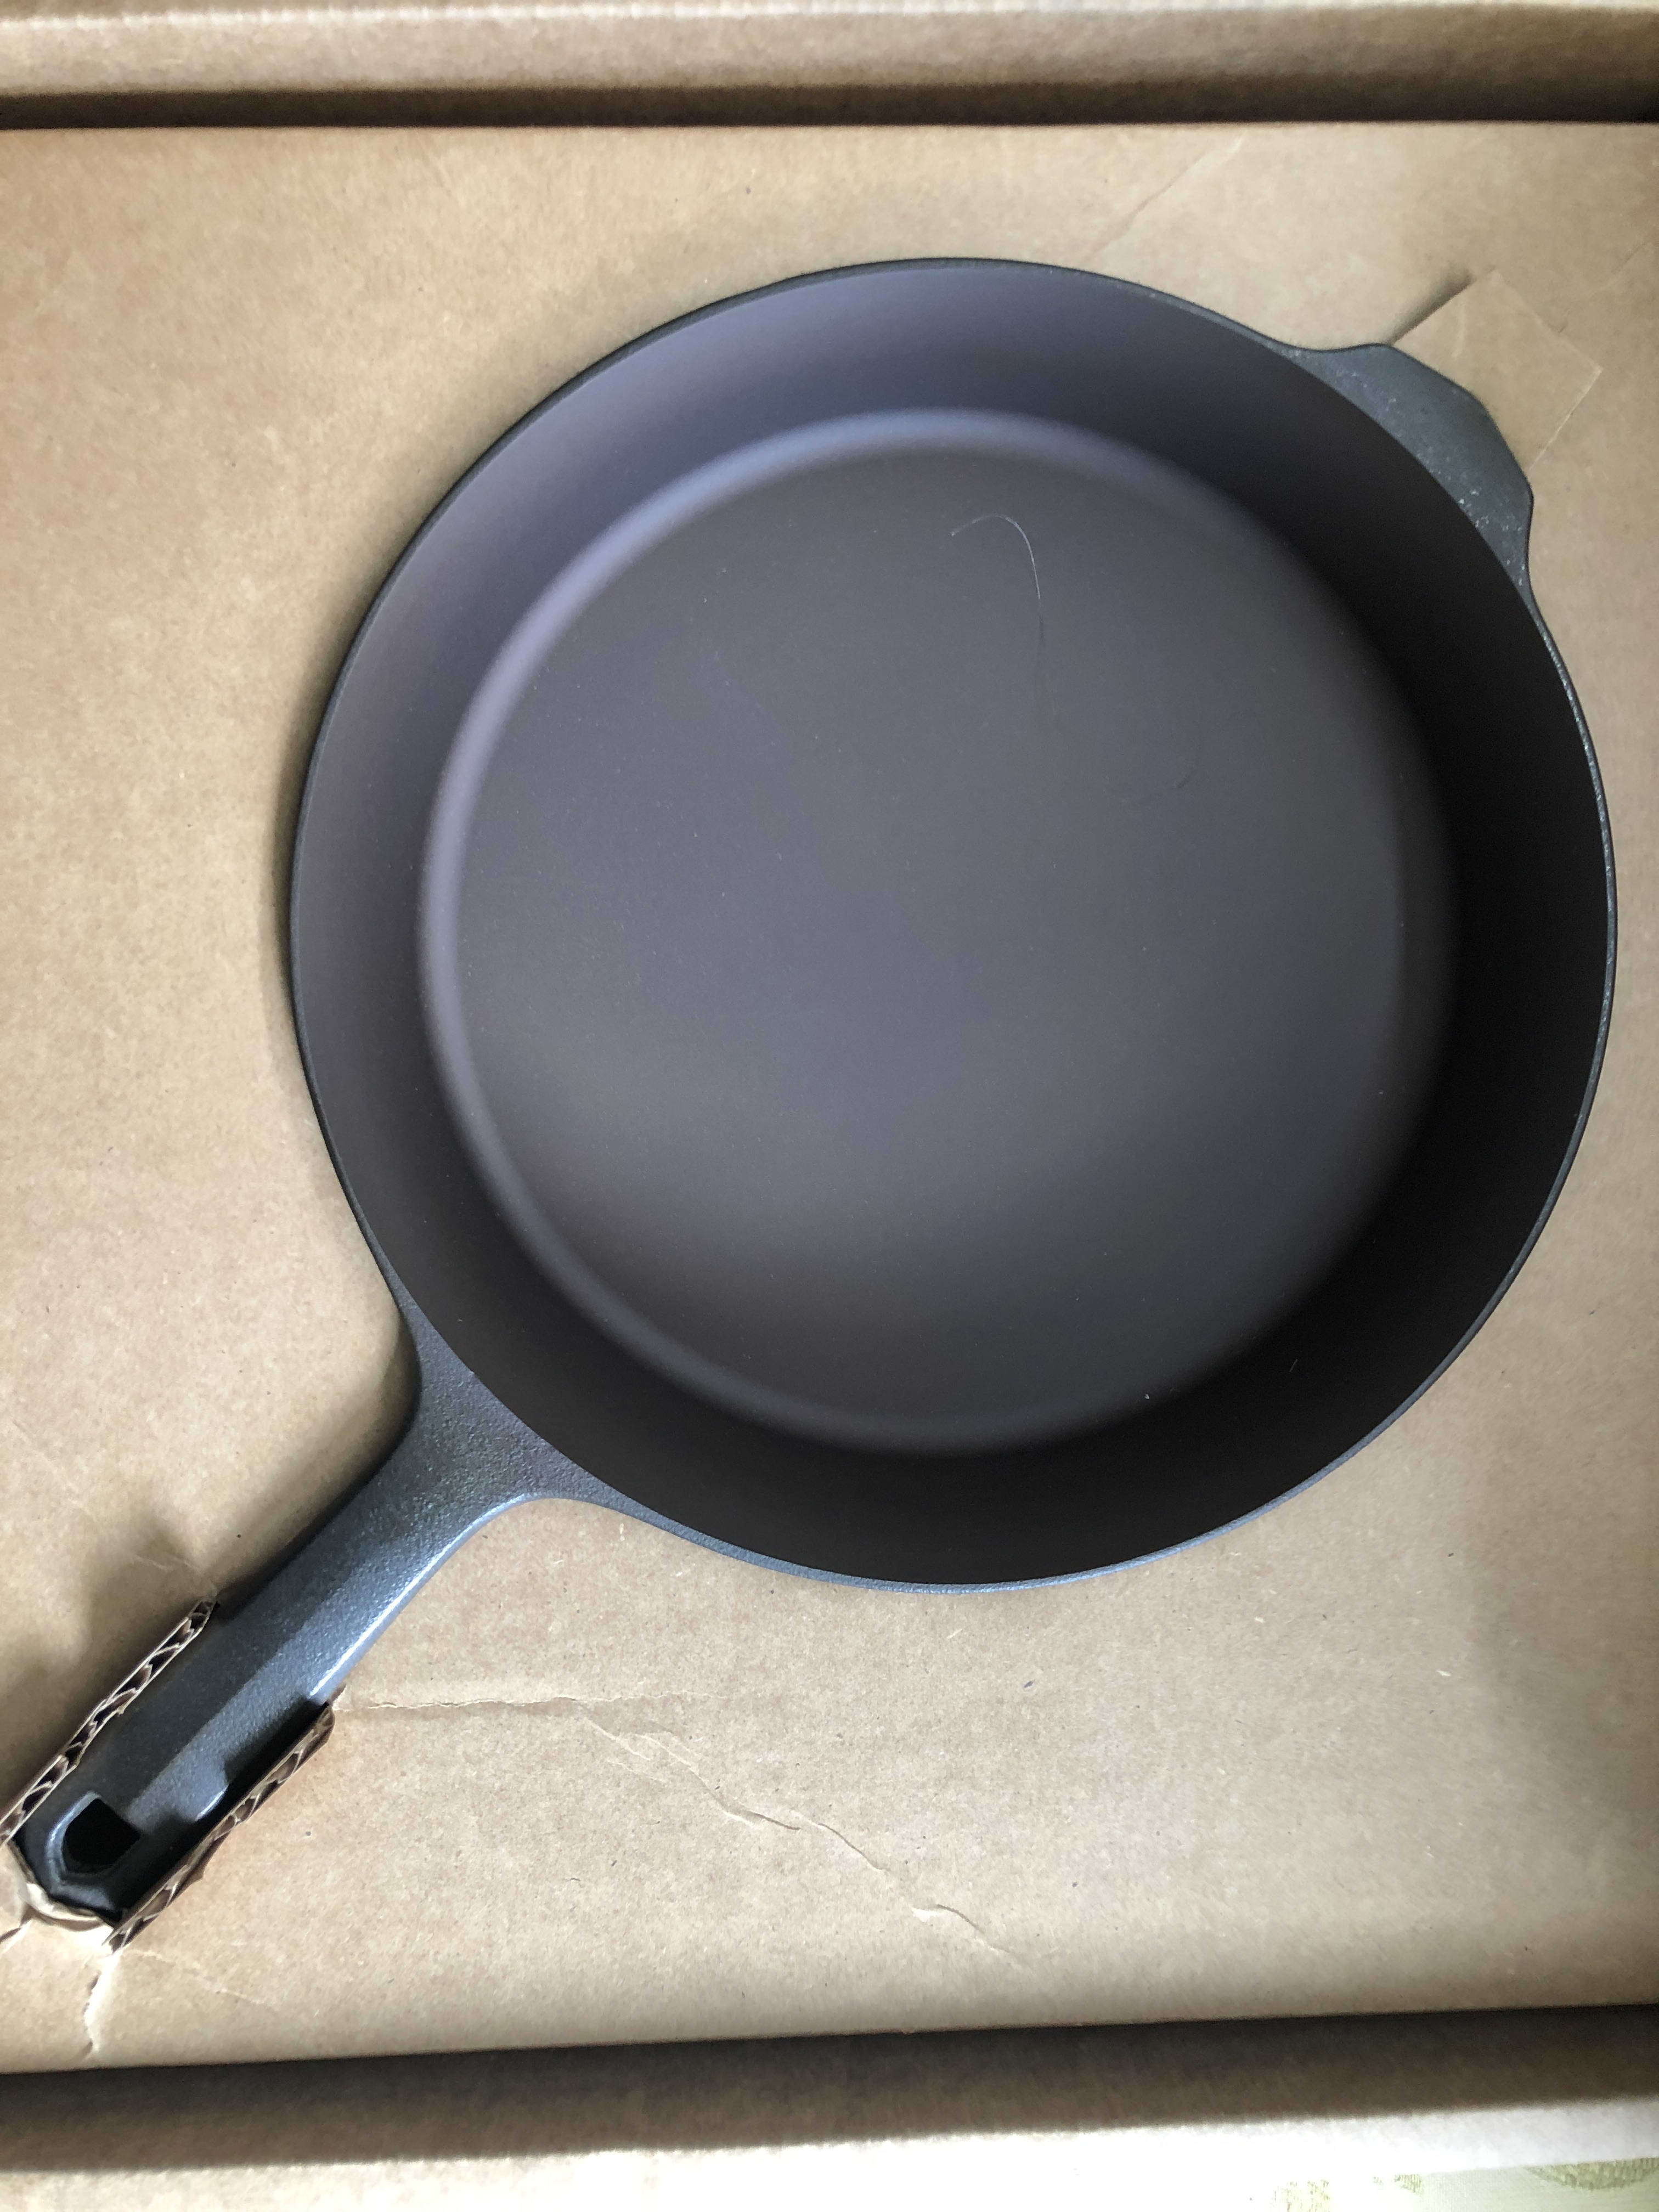 Why are Lodge Cast Iron Skillets So Cheap?